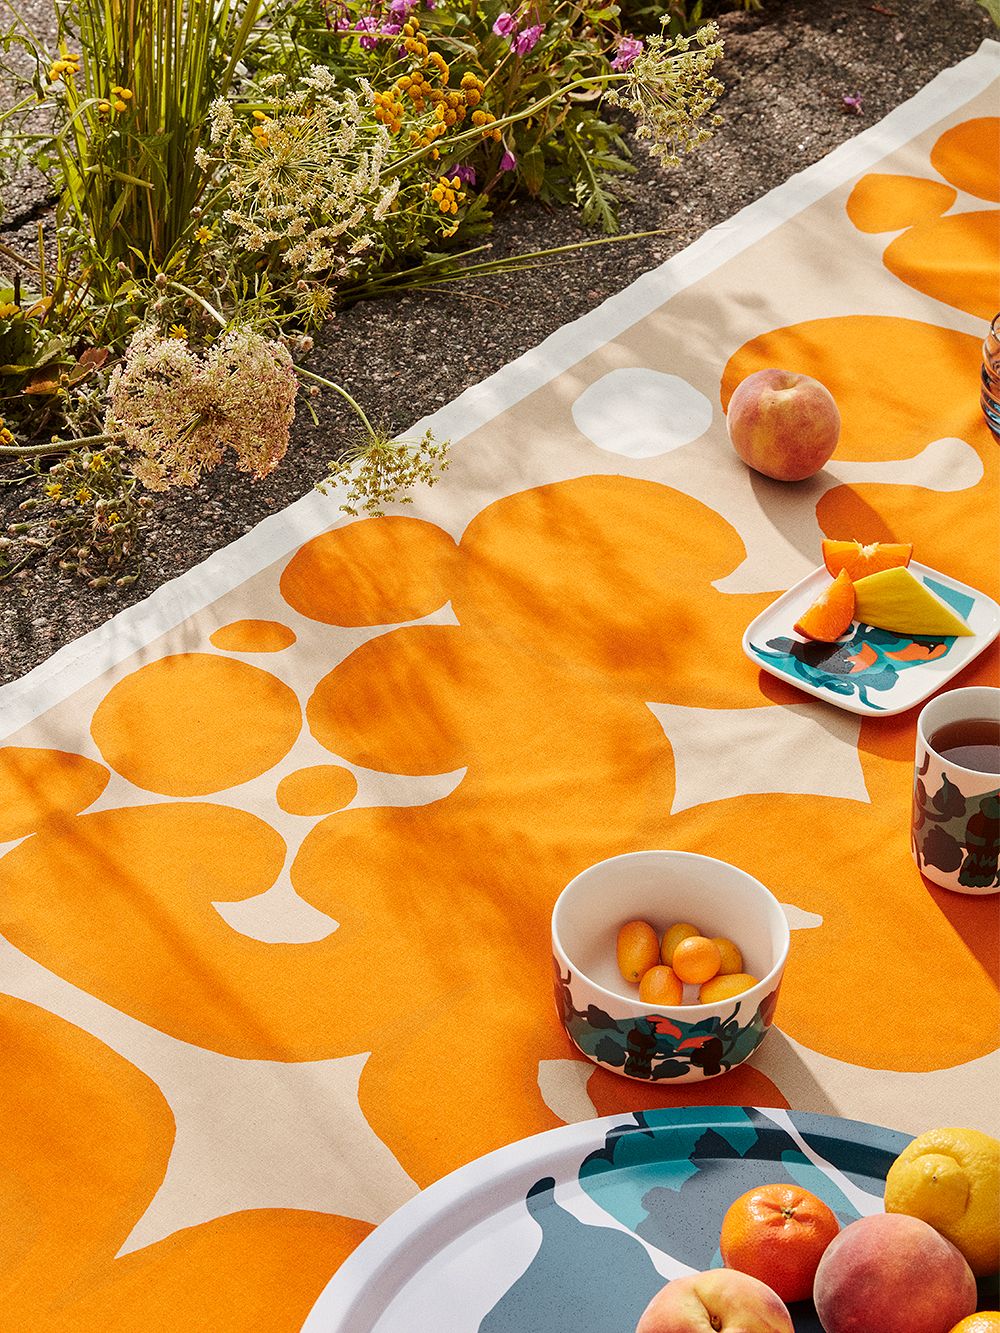 An image of Marimekko's Keidas fabric placed on the ground, with Pepe tableware on top of it.